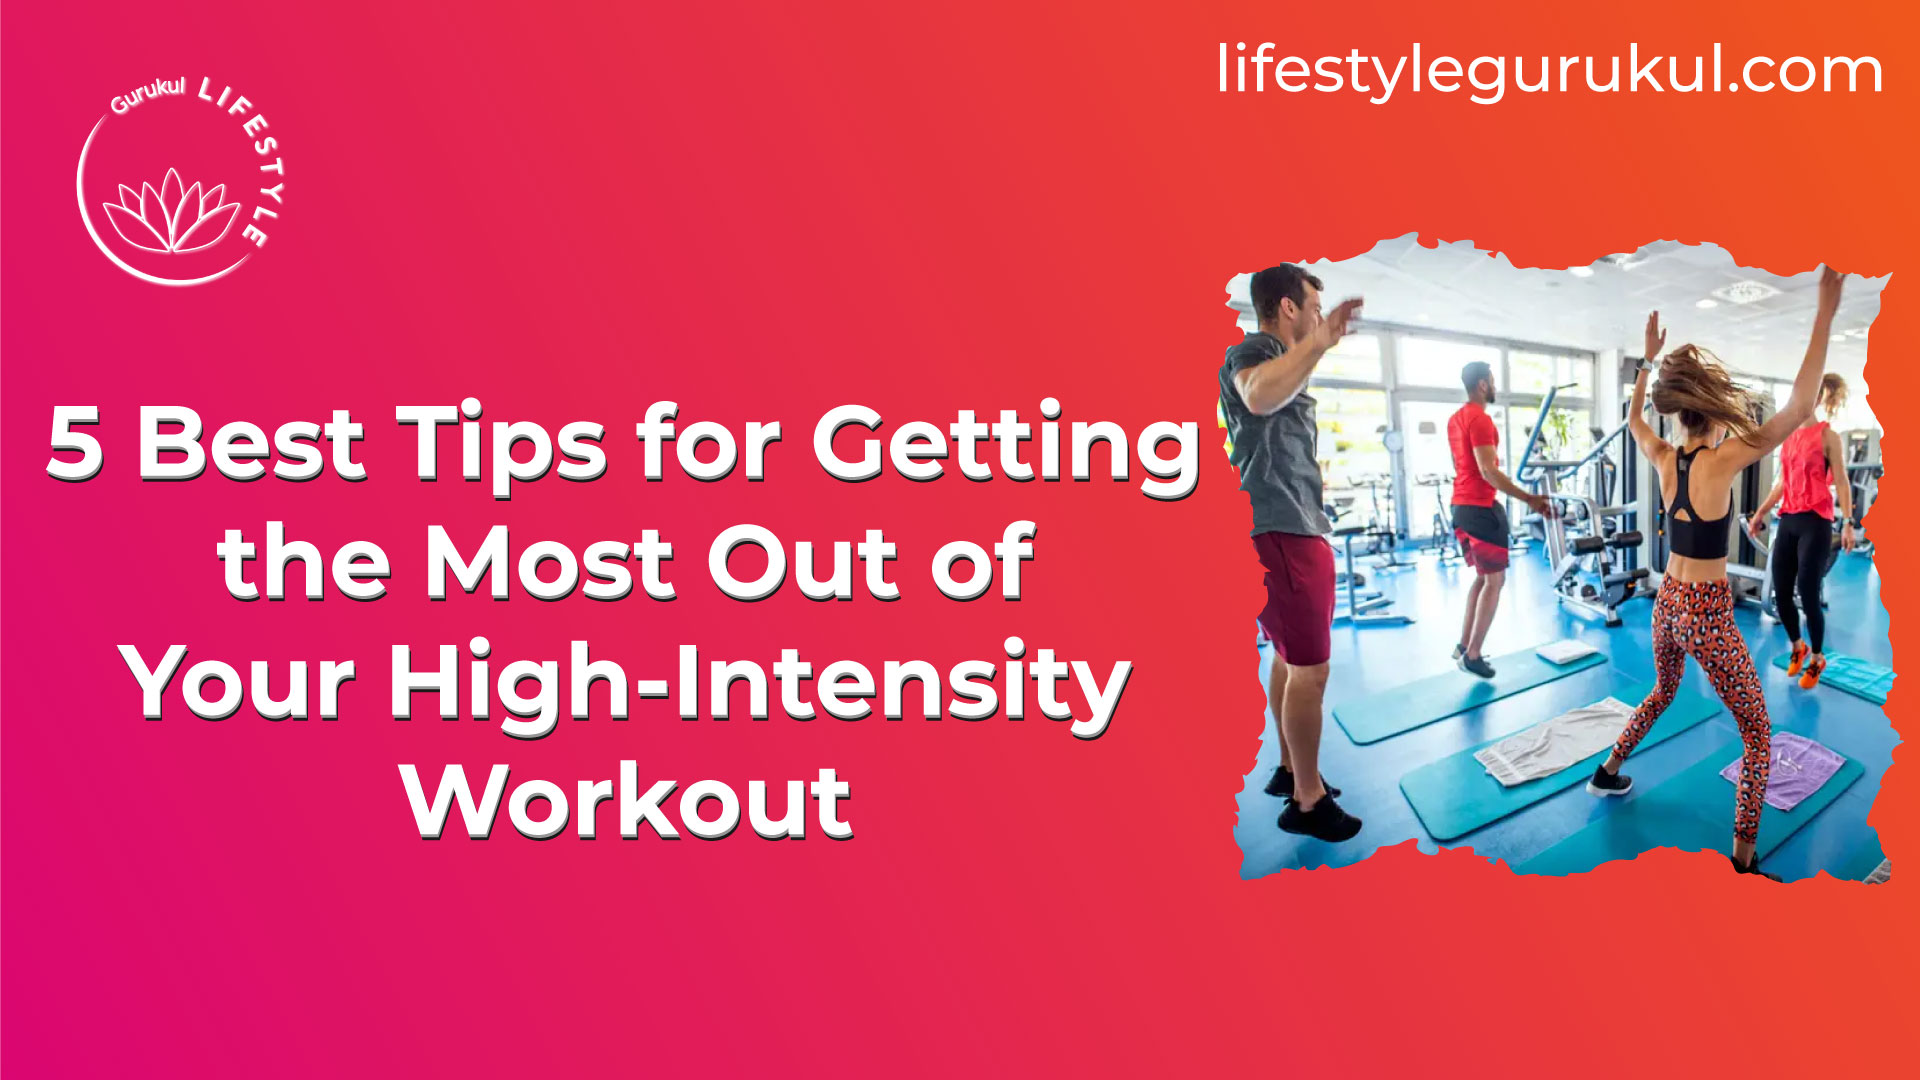 5 Best Tips for Getting the Most Out of Your High-Intensity Workout